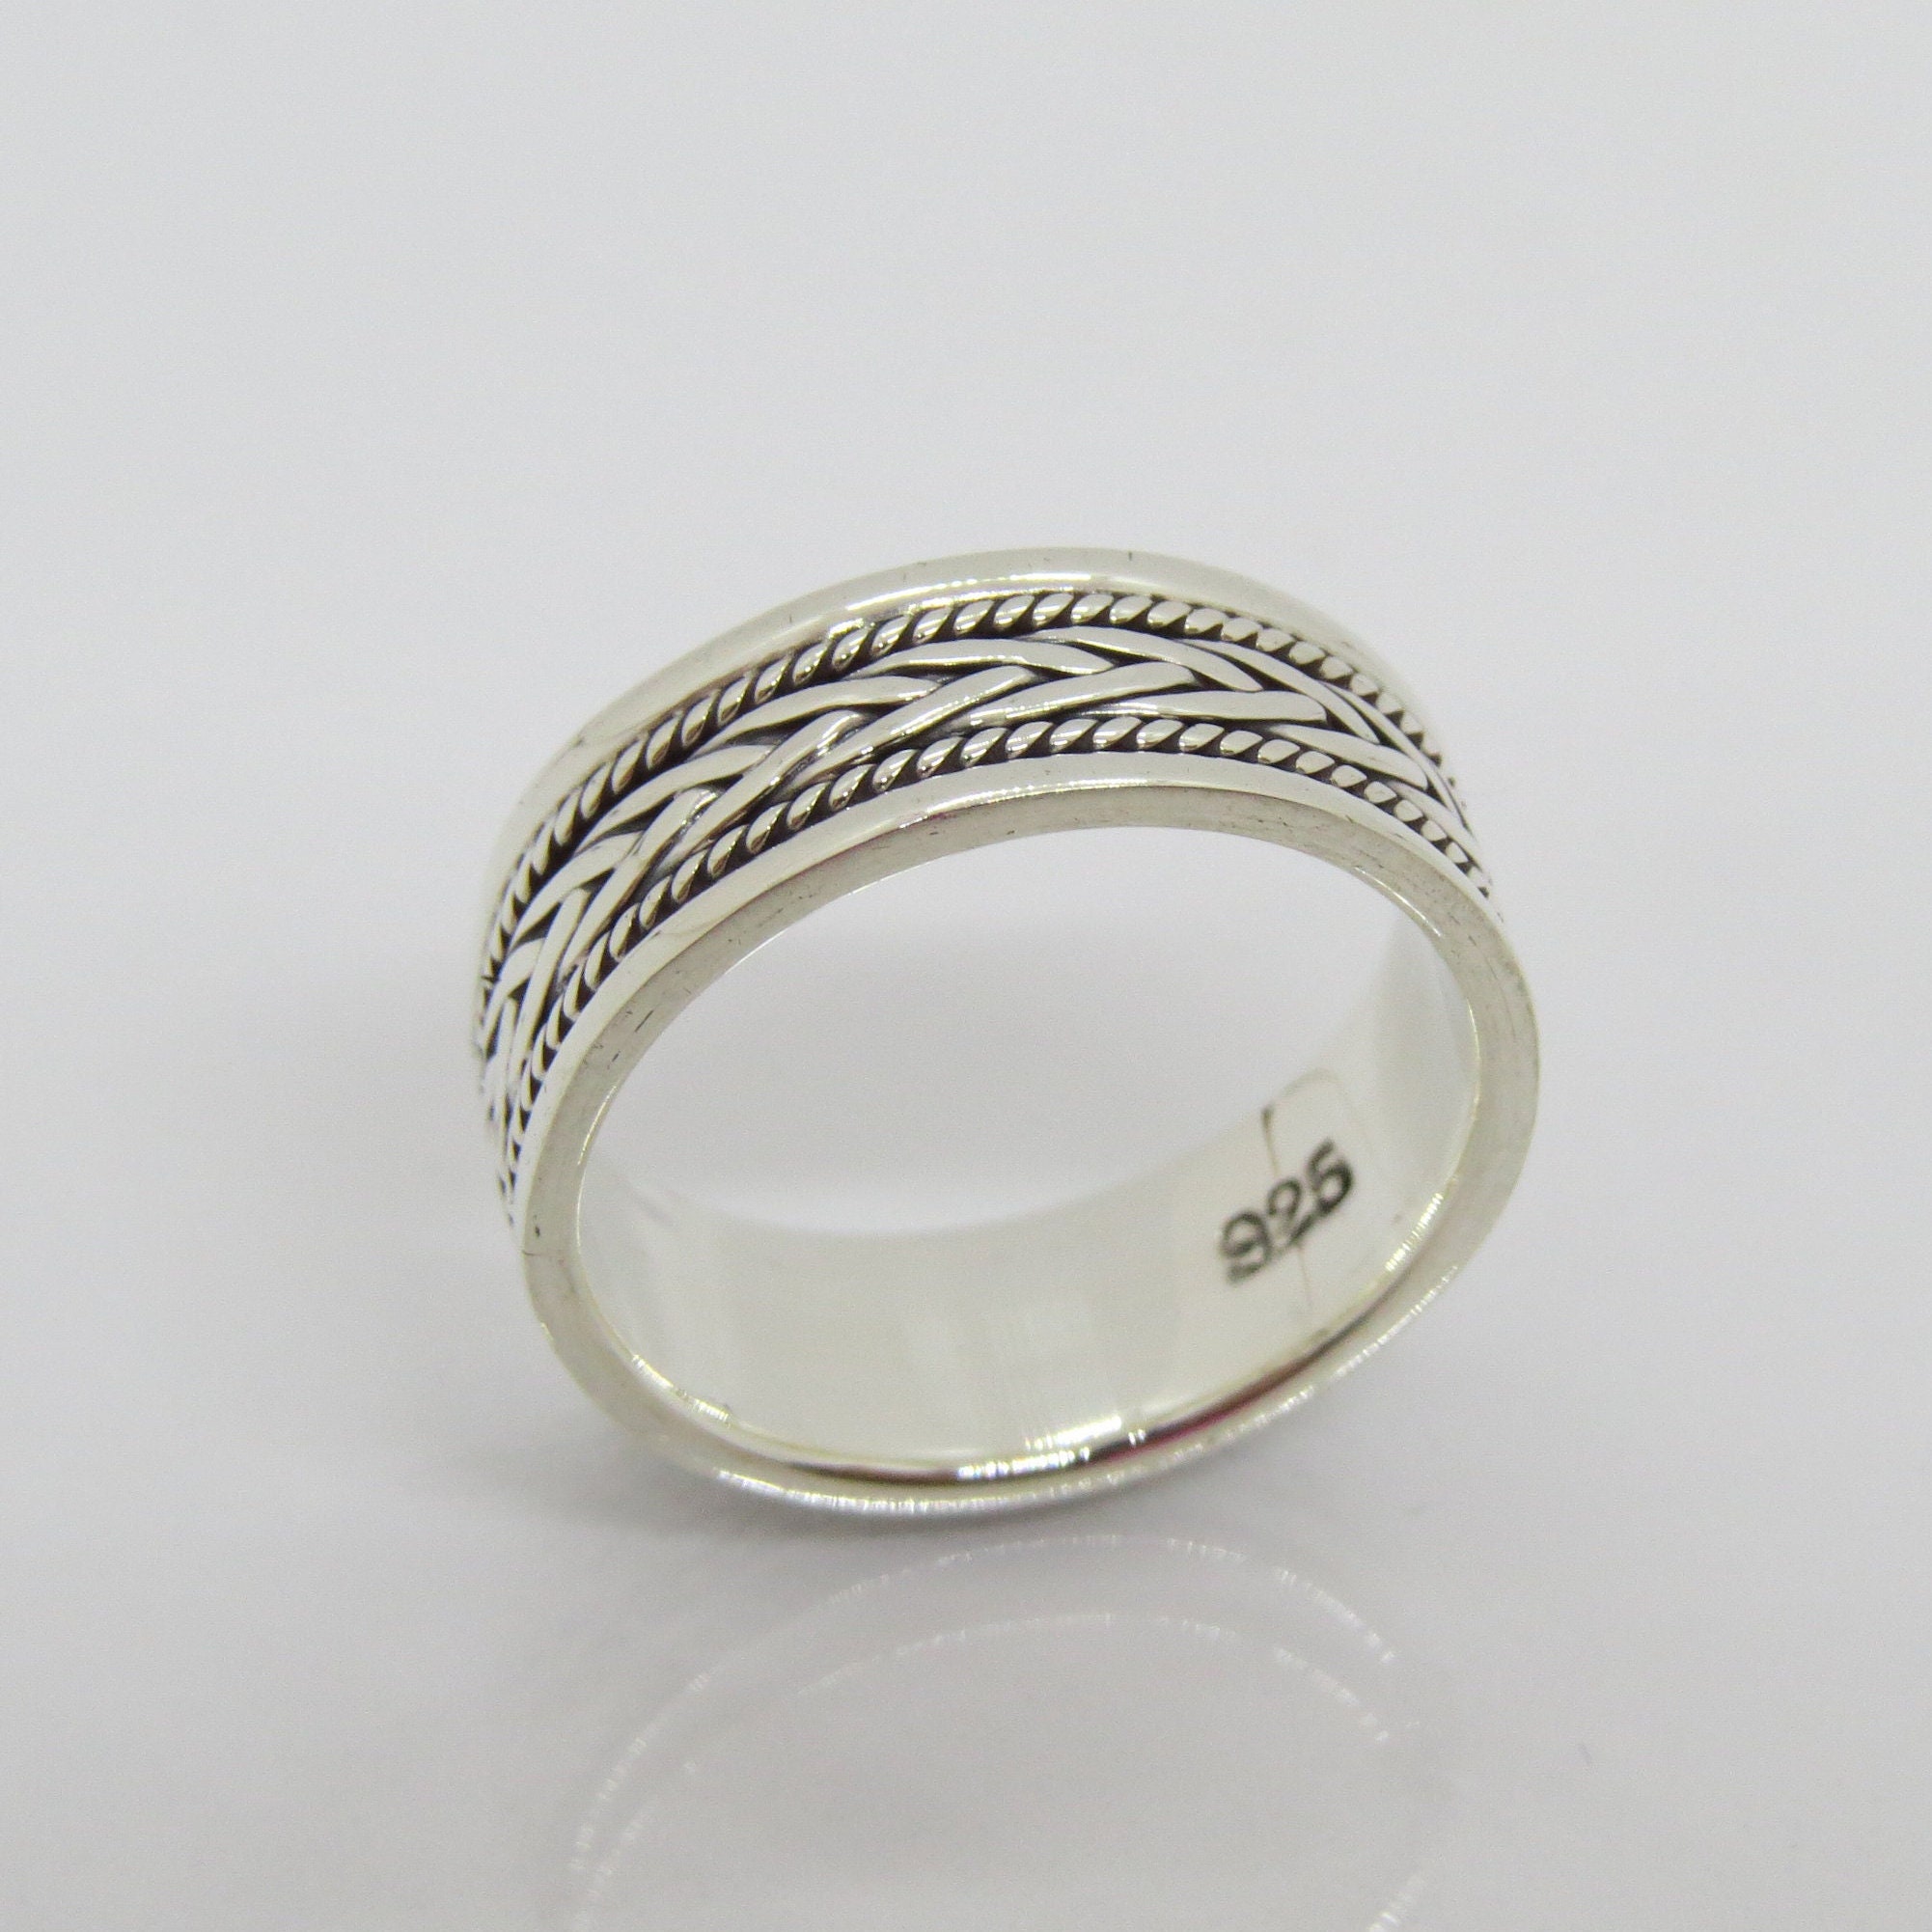 ·925 Sterling Silver Bali 16 mm Wide Cigar Band Ring Size 6,7,8,9